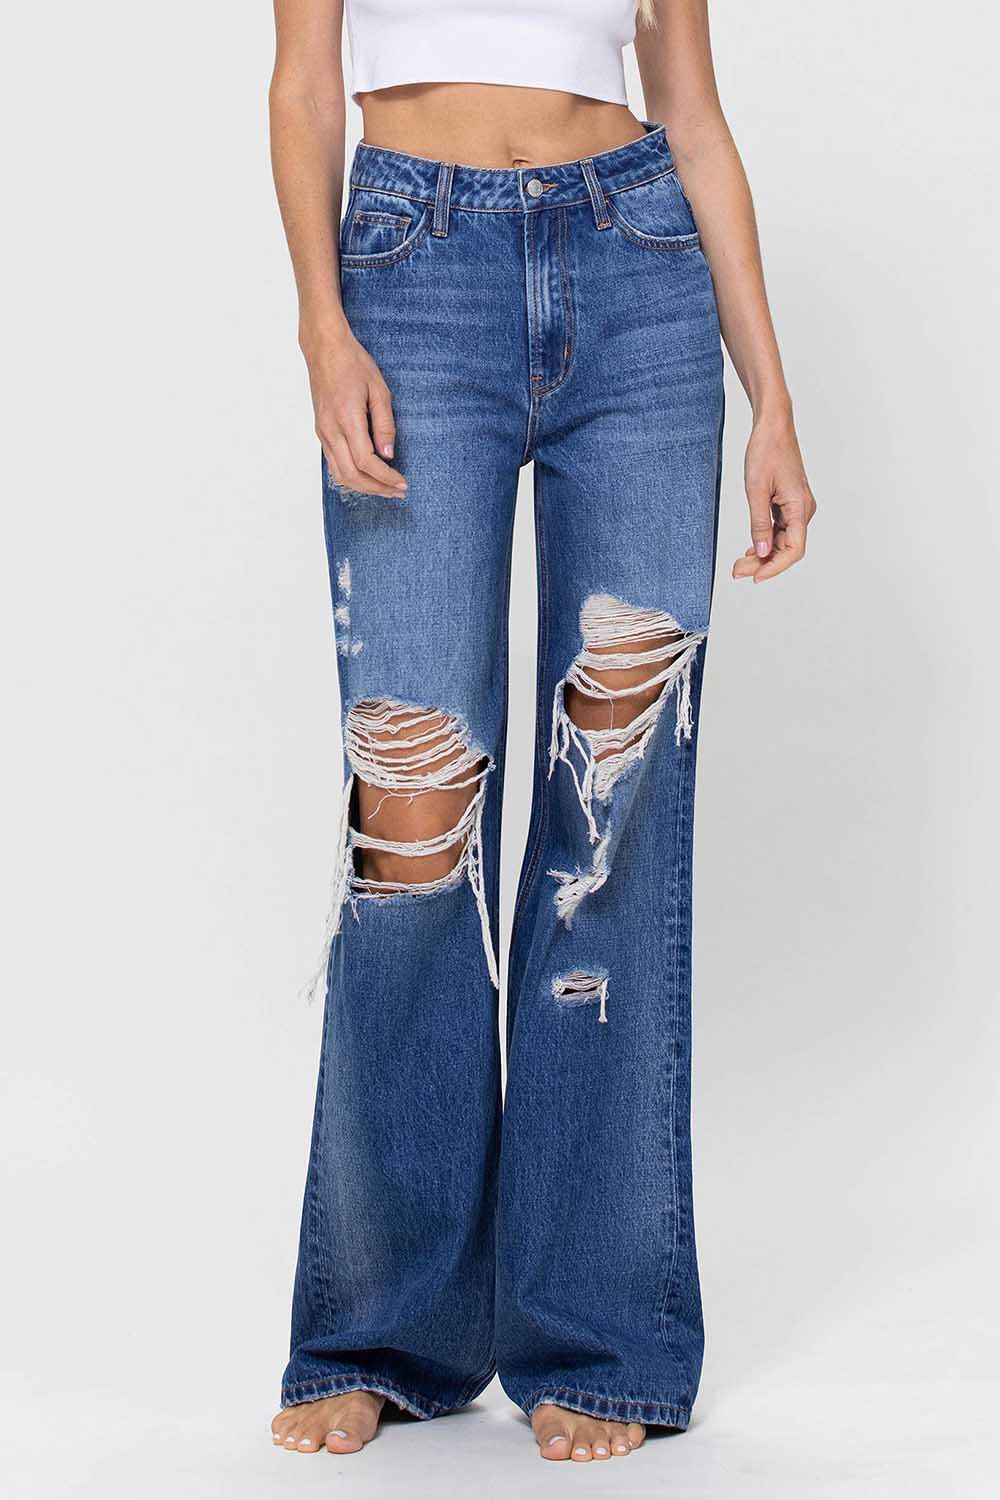 90's Loose Fit Jeans